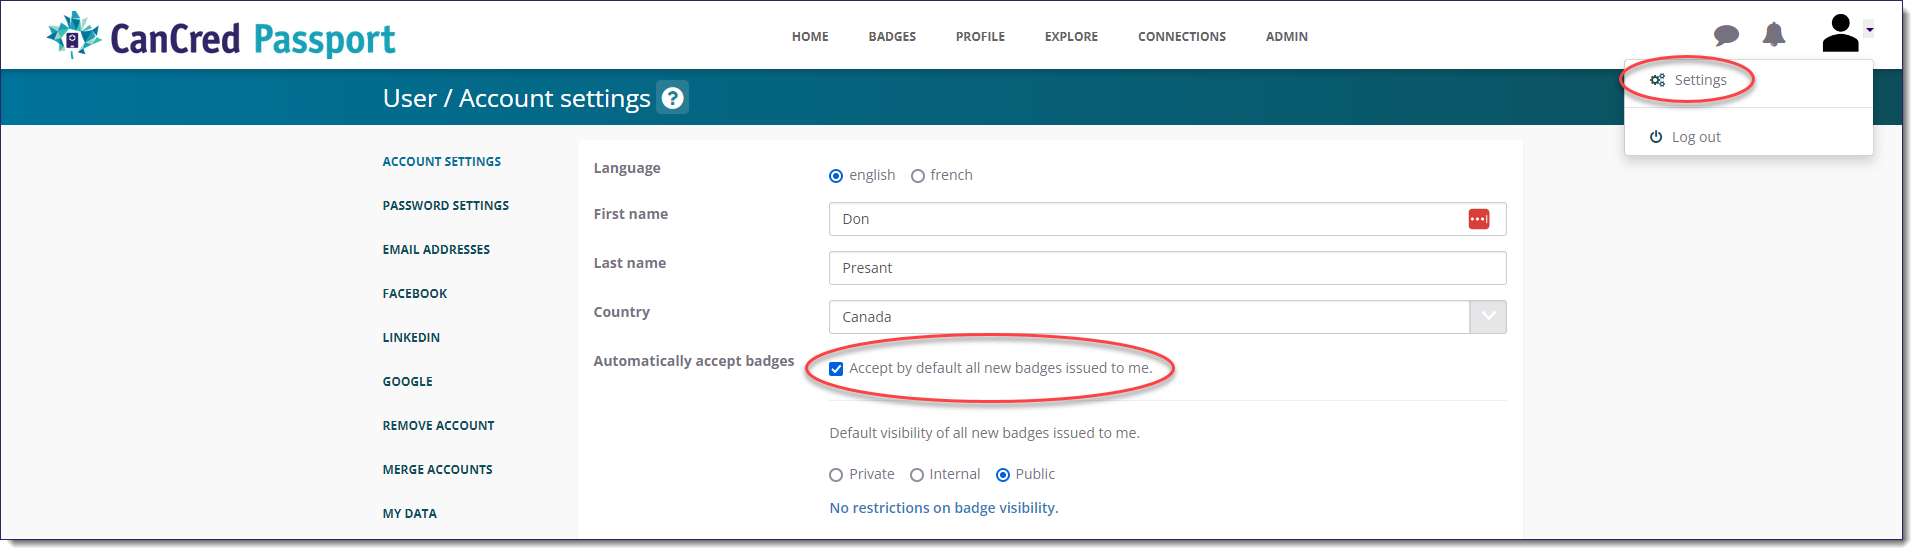 settings for auto-accepting badges